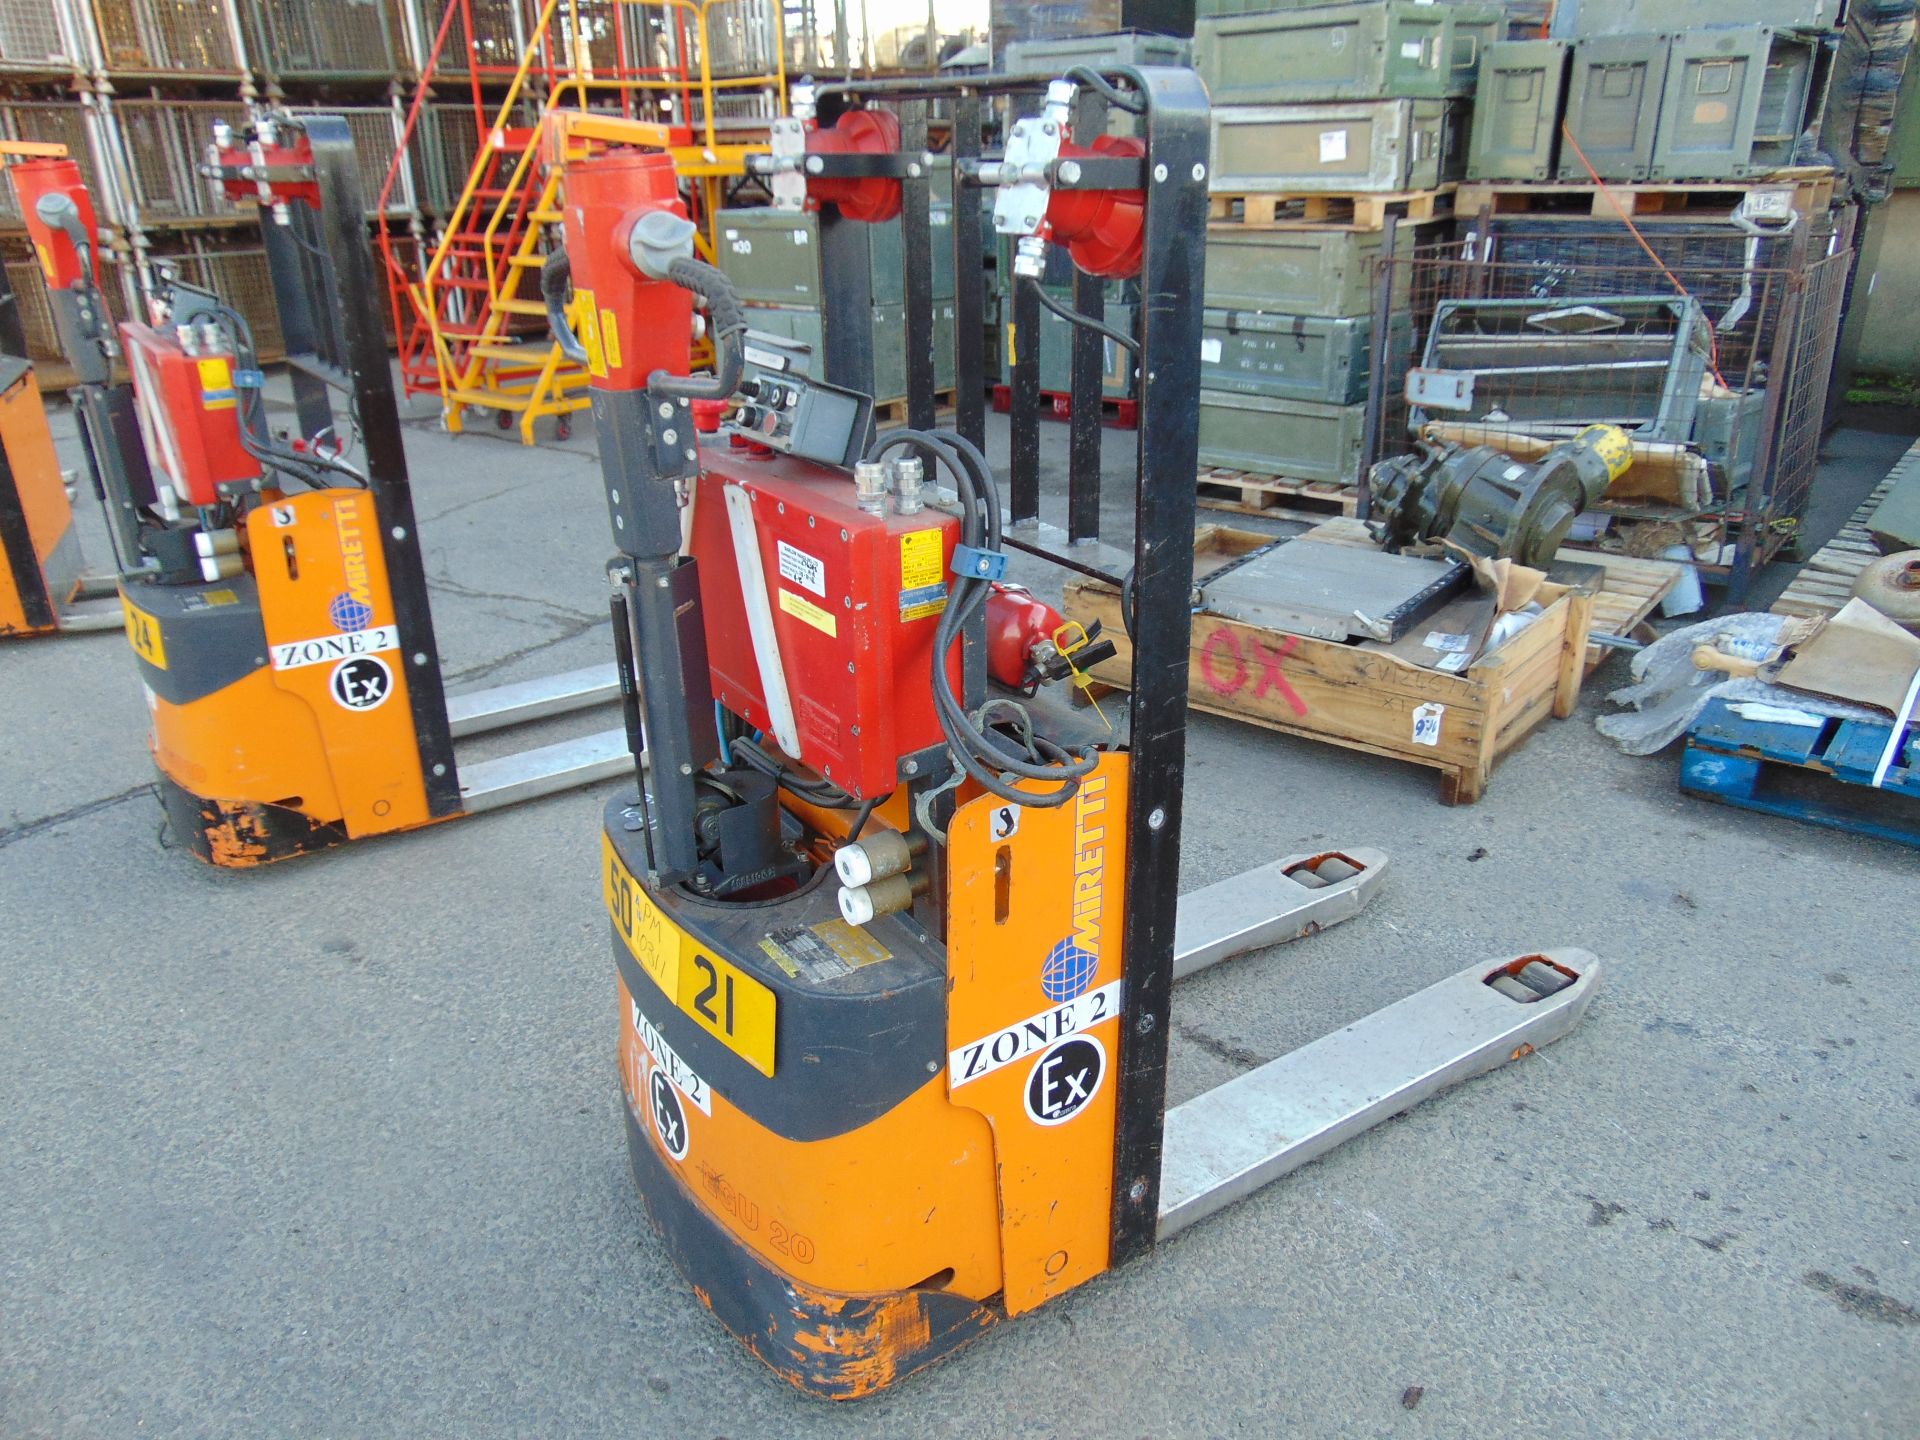 Still EGU 20 Class C, Zone 2 Protected Electric Powered Pallet Truck